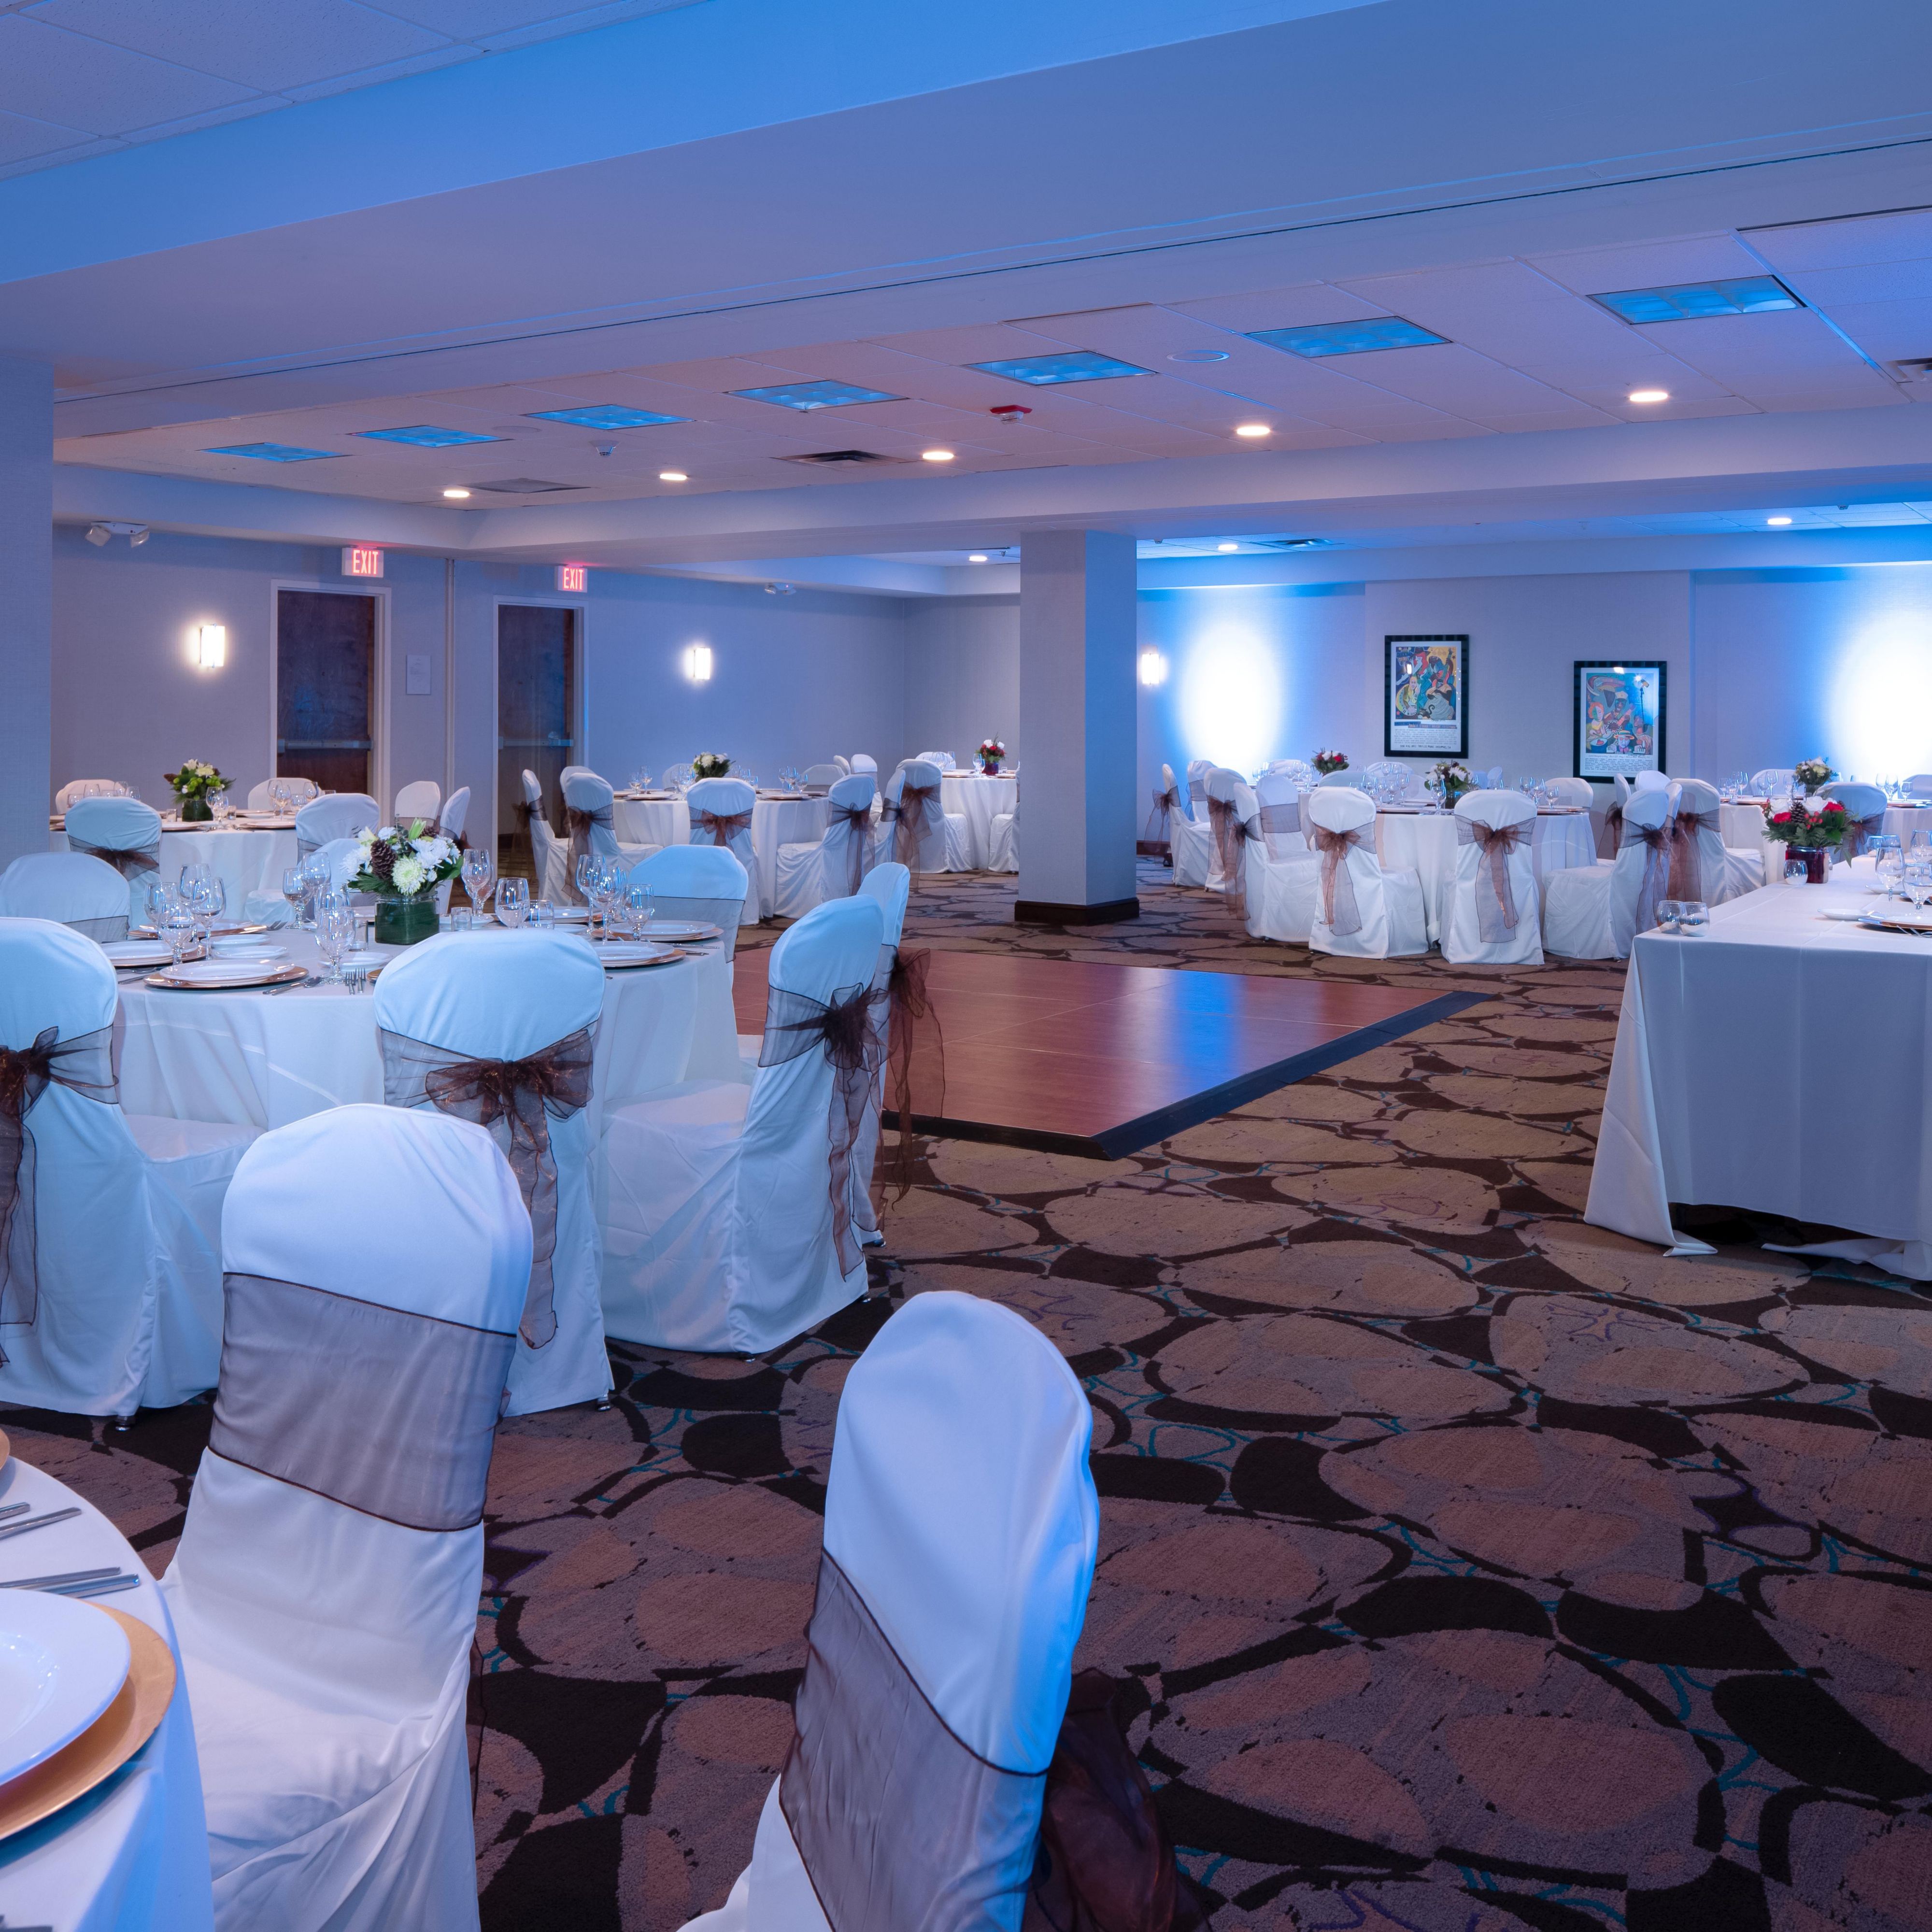 The Tennessee Ballroom is the perfect place for your next event